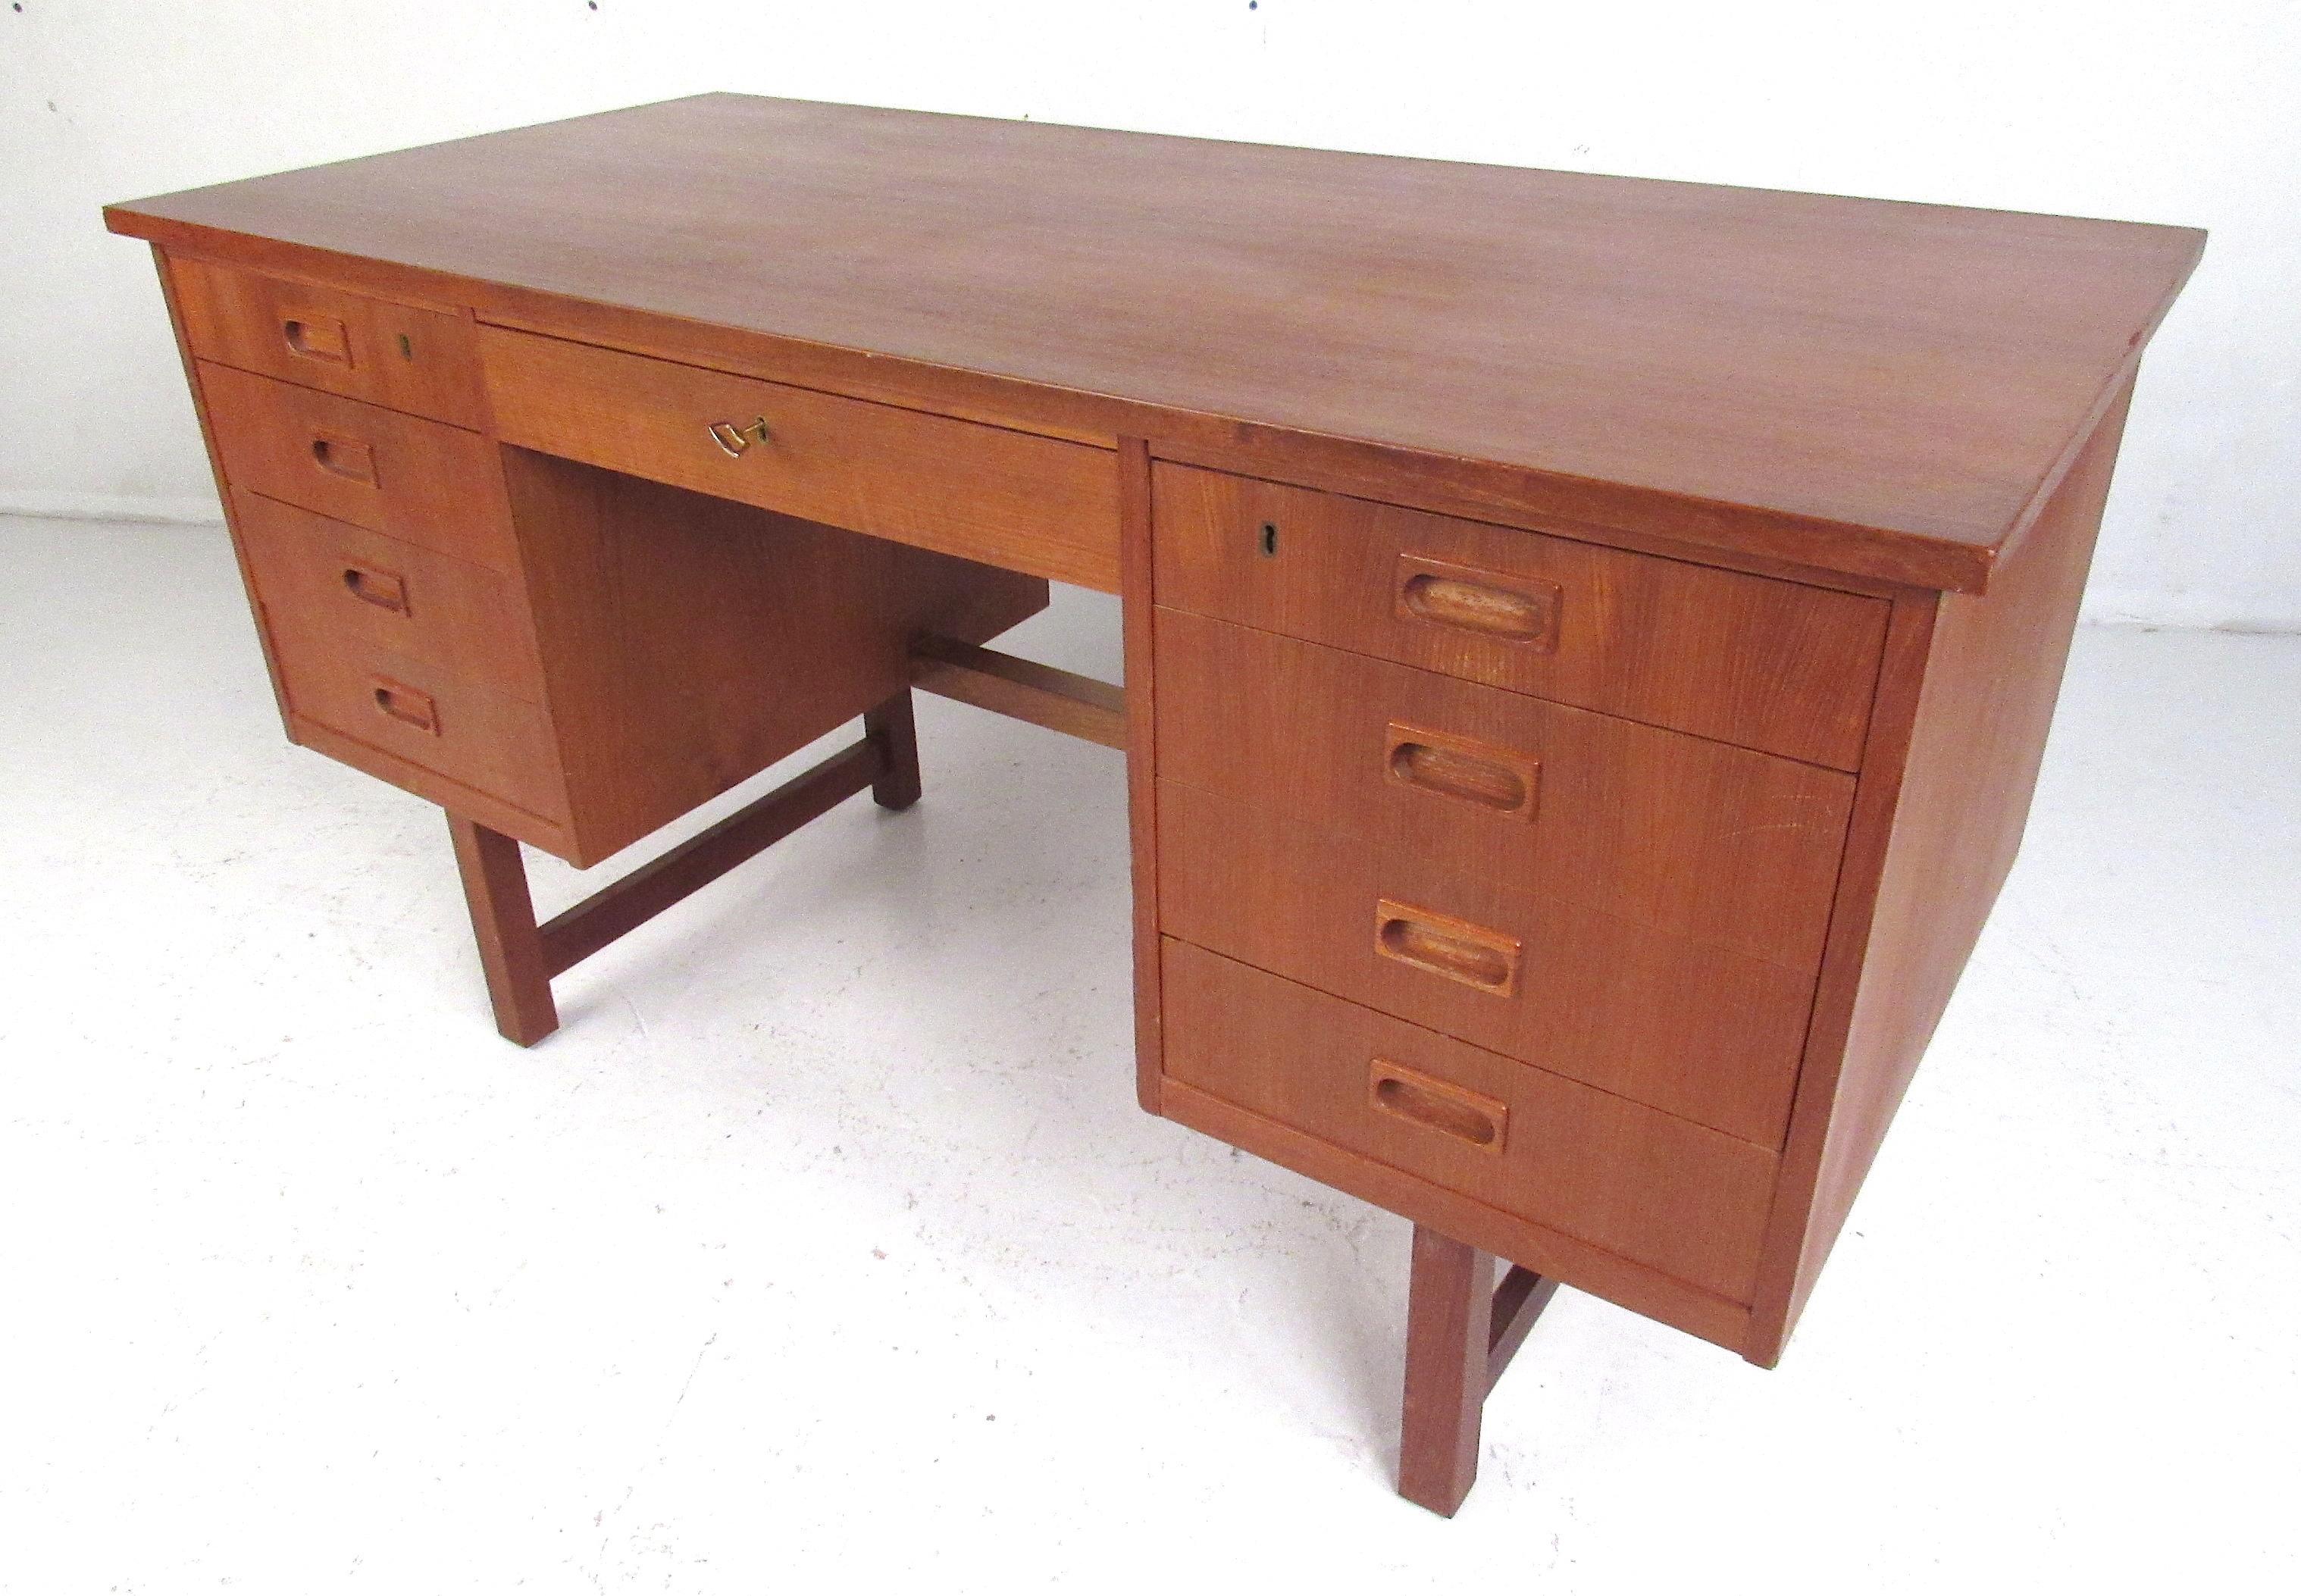 Classic desk from the 1970s, minimalist Danish design. Teak veneer, recessed pulls, nine drawers with top three locking, finished back. Key supplied. Please confirm item location (NY or NJ) with dealer.